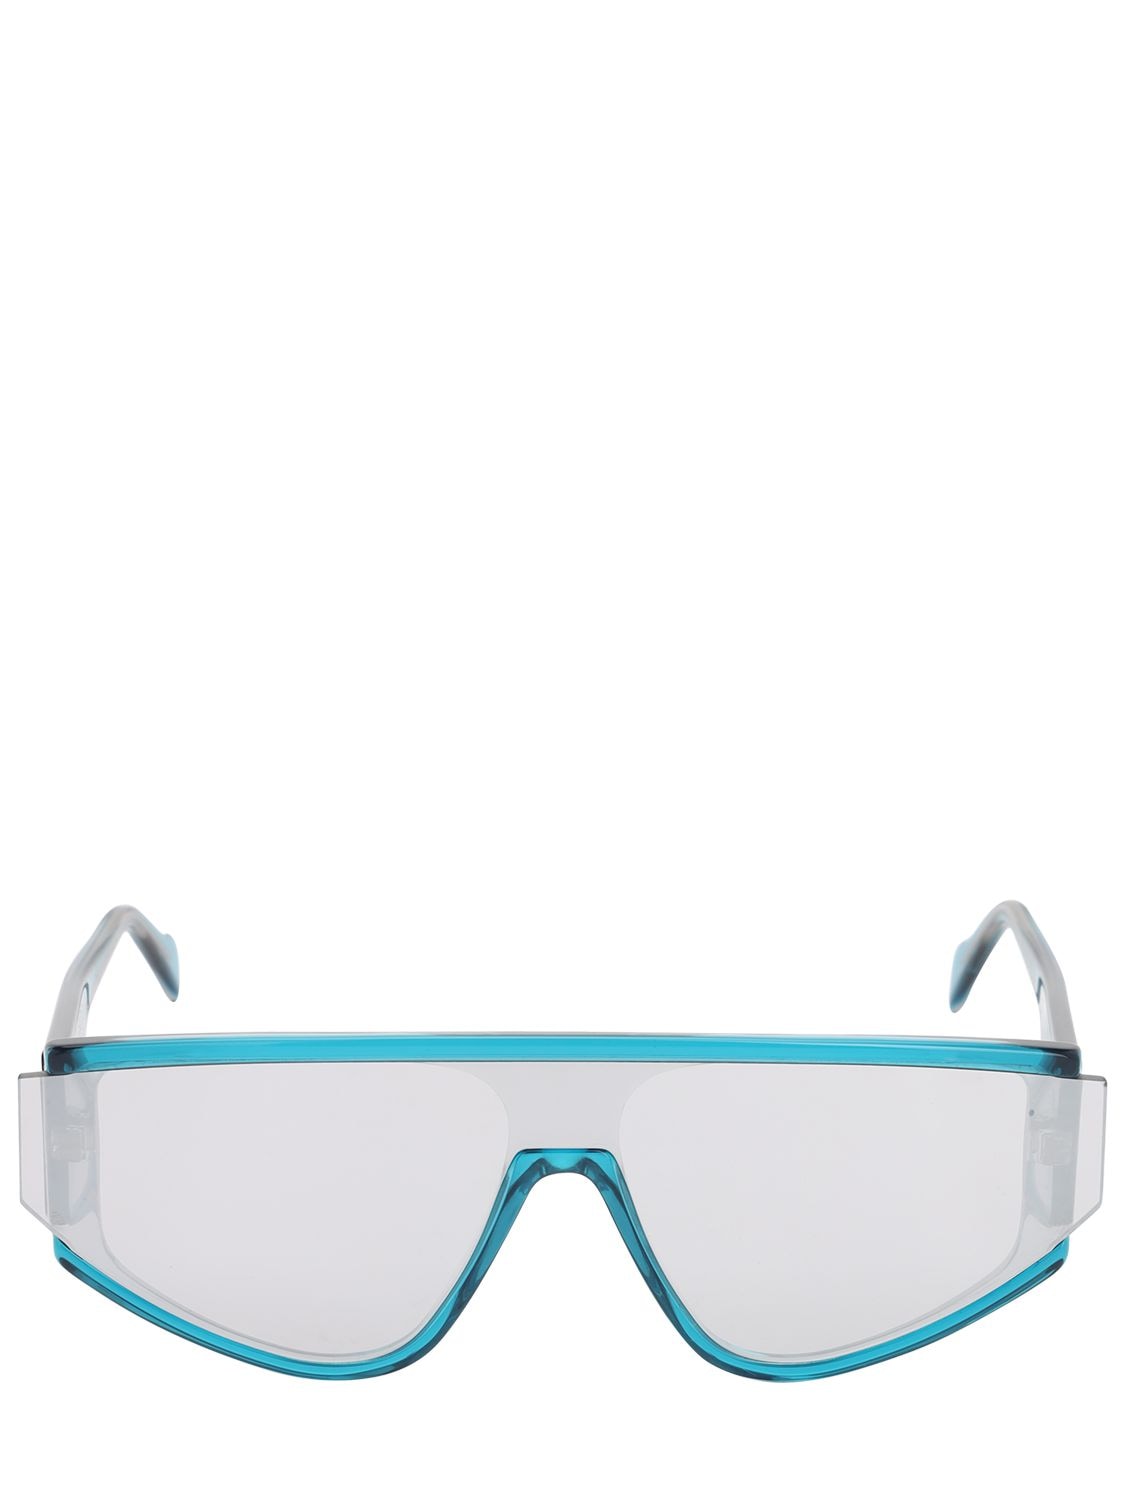 Andy Wolf Detweiler Acetate Mask Sunglasses In Blue,mirrored